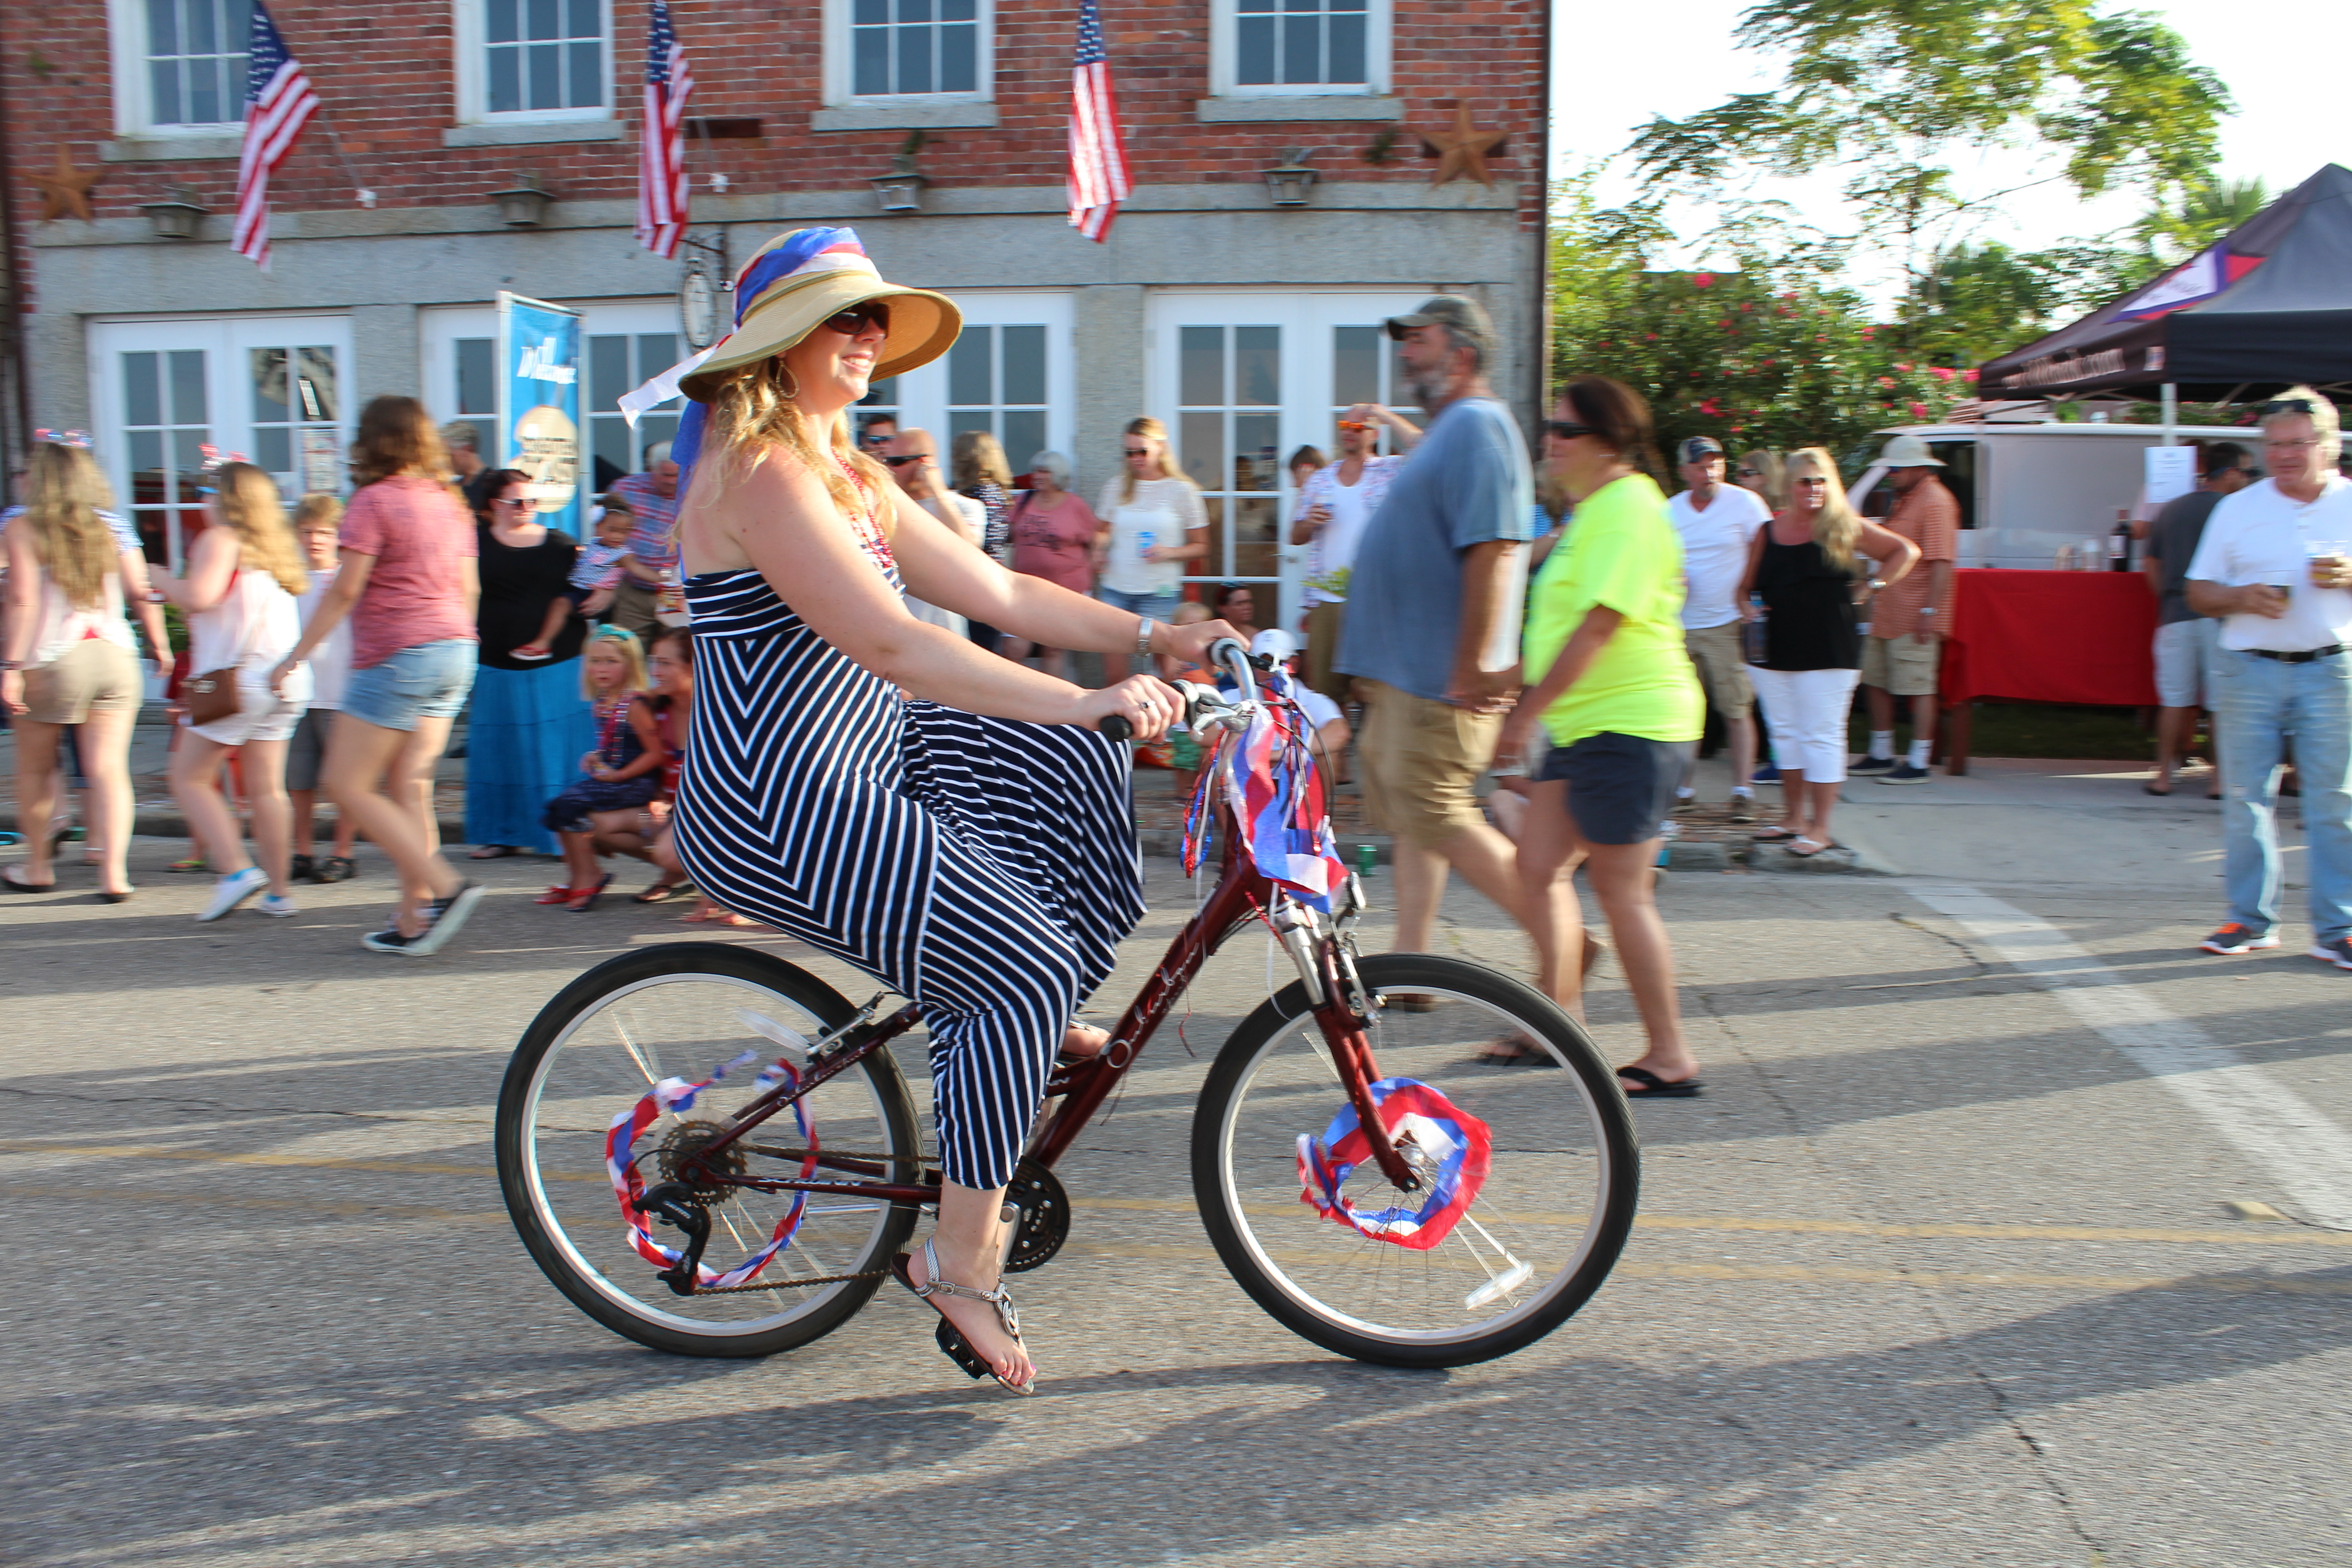 Lady riding bike in the parade